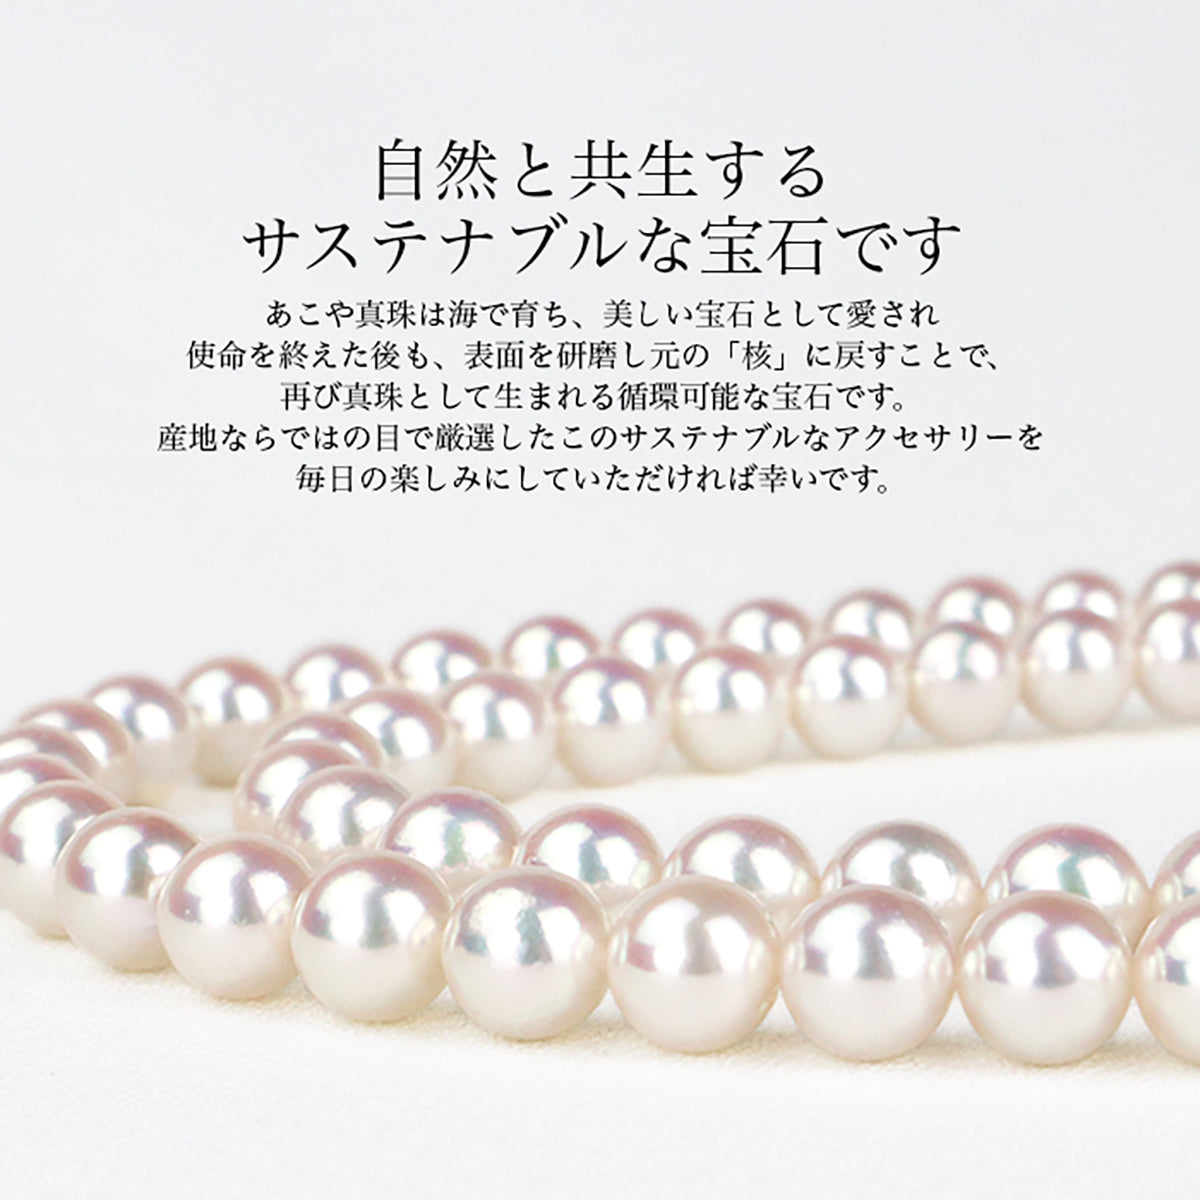 Hanadama Pearl Pearl Ring Ring Akoya Pearl [8.5-9.0mm] SV925 Platinum Finish No. 9/11/13/15 Comes with 5S Card Identification and Storage Case (3943)